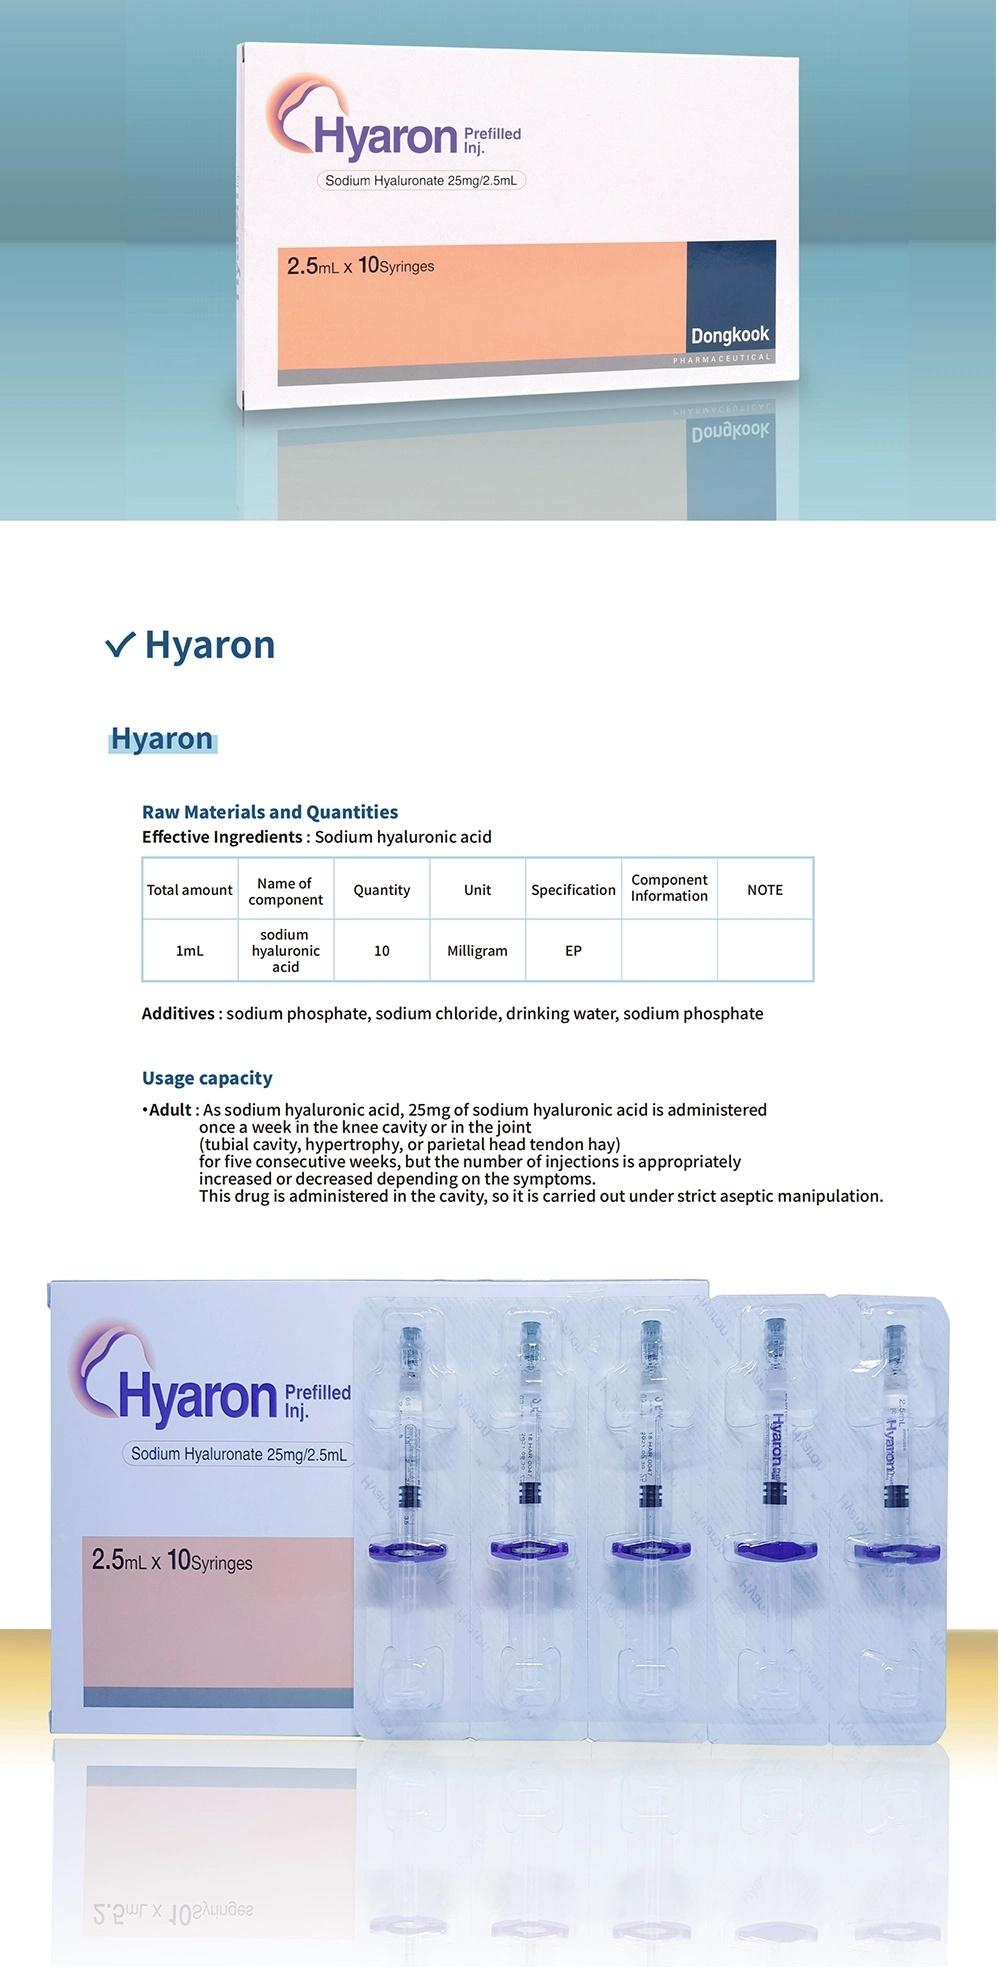 Korea Best Quality Skinbooster Dongkook Hyaron Skin Care Booster Hyaluronic Acid Dermal Filler Injection with Cheap Price